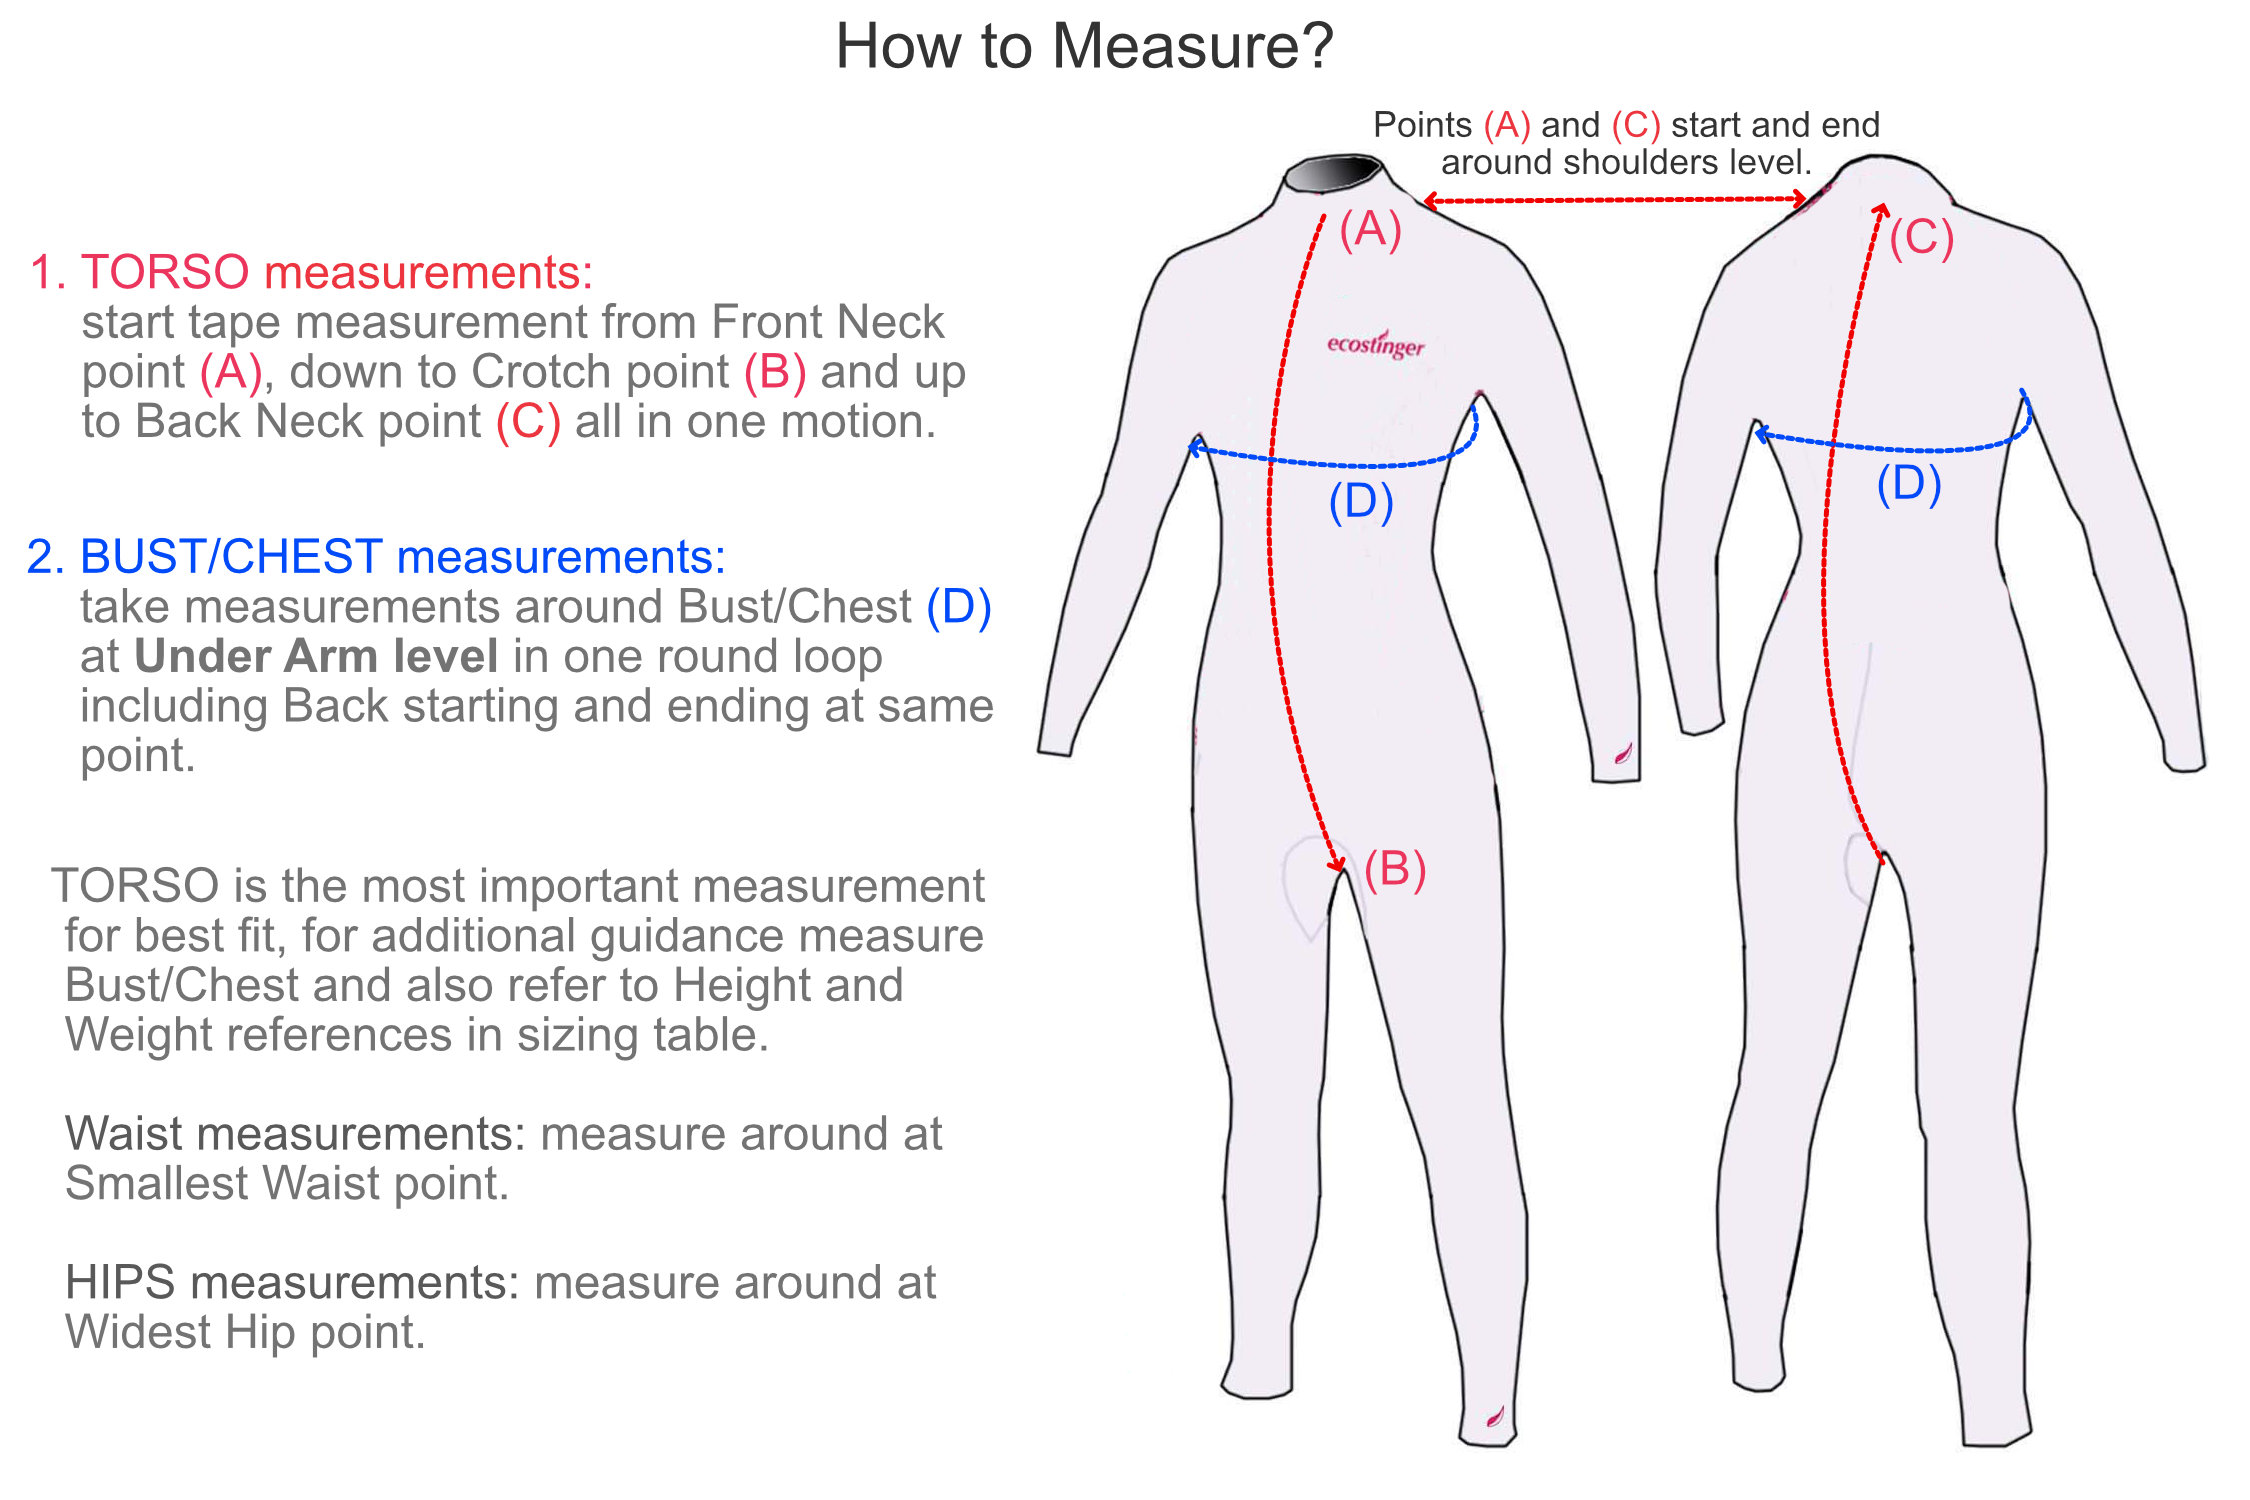 Ecostinger how to measure